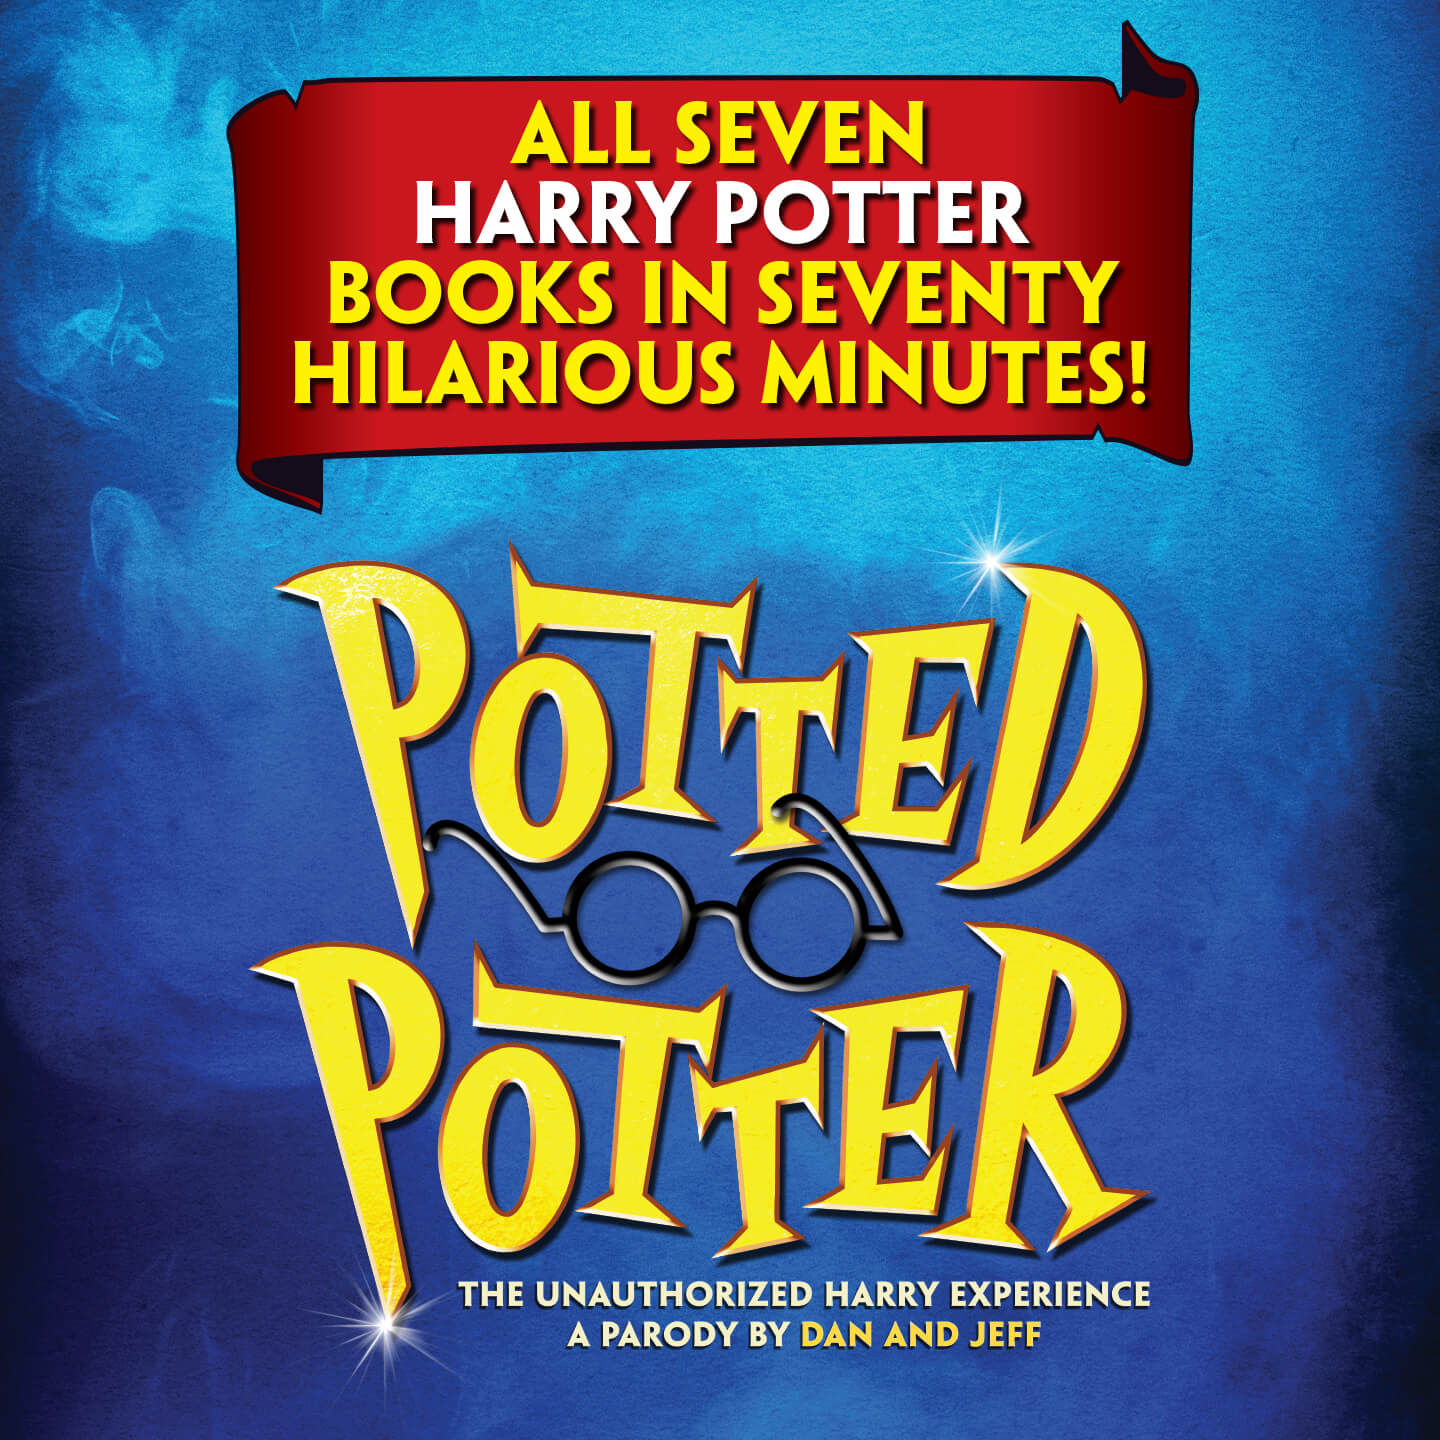 Potted Potter – The Unauthorized Harry Experience – a Parody by Dan and Jeff